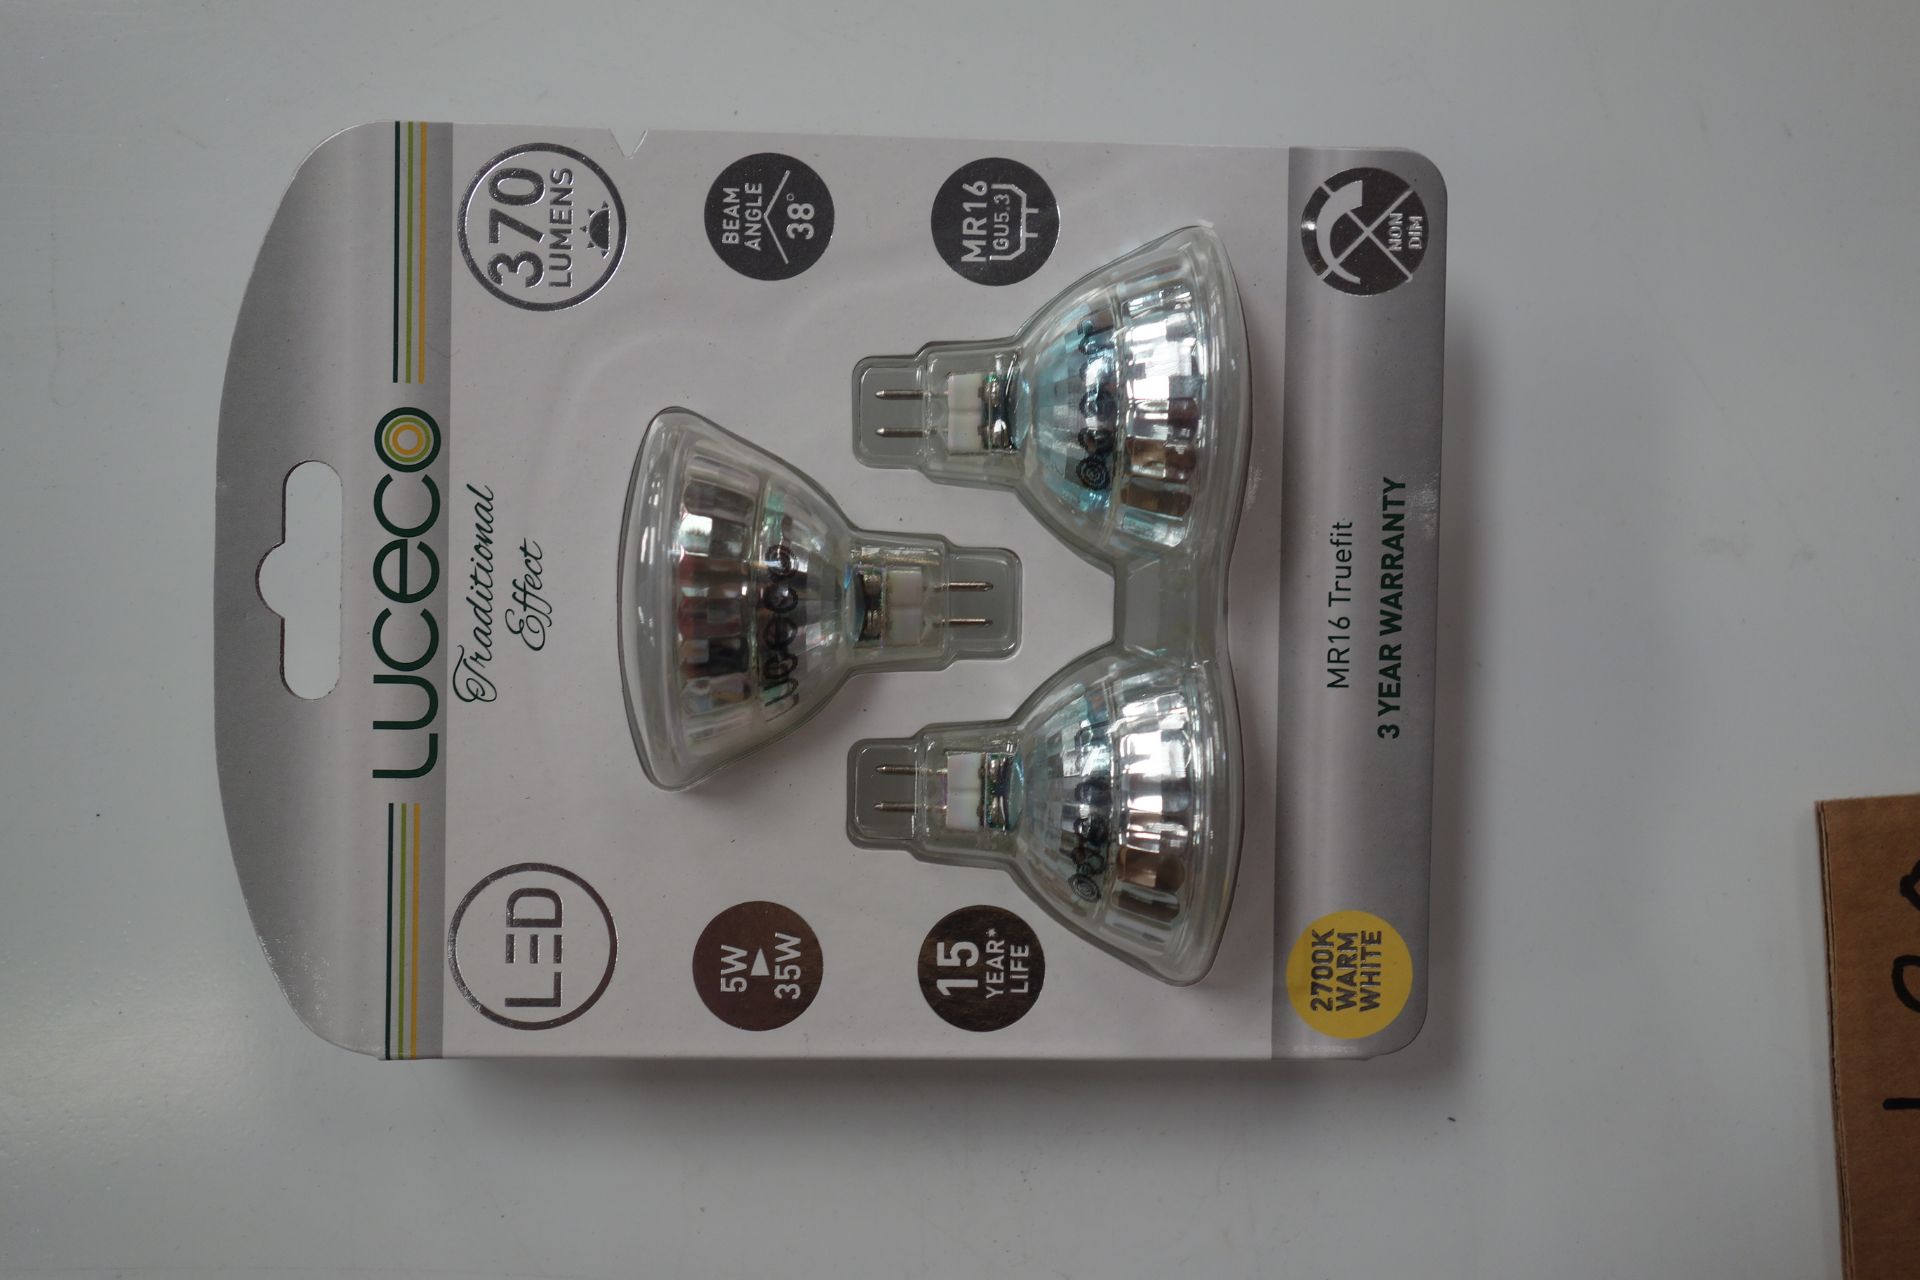 50 X Packs Of Luceco LMW5937/3-LE JX LED MR16 Lamps 5W 370 Lumen 3 X Lamps Per Pack 150 Lamps In